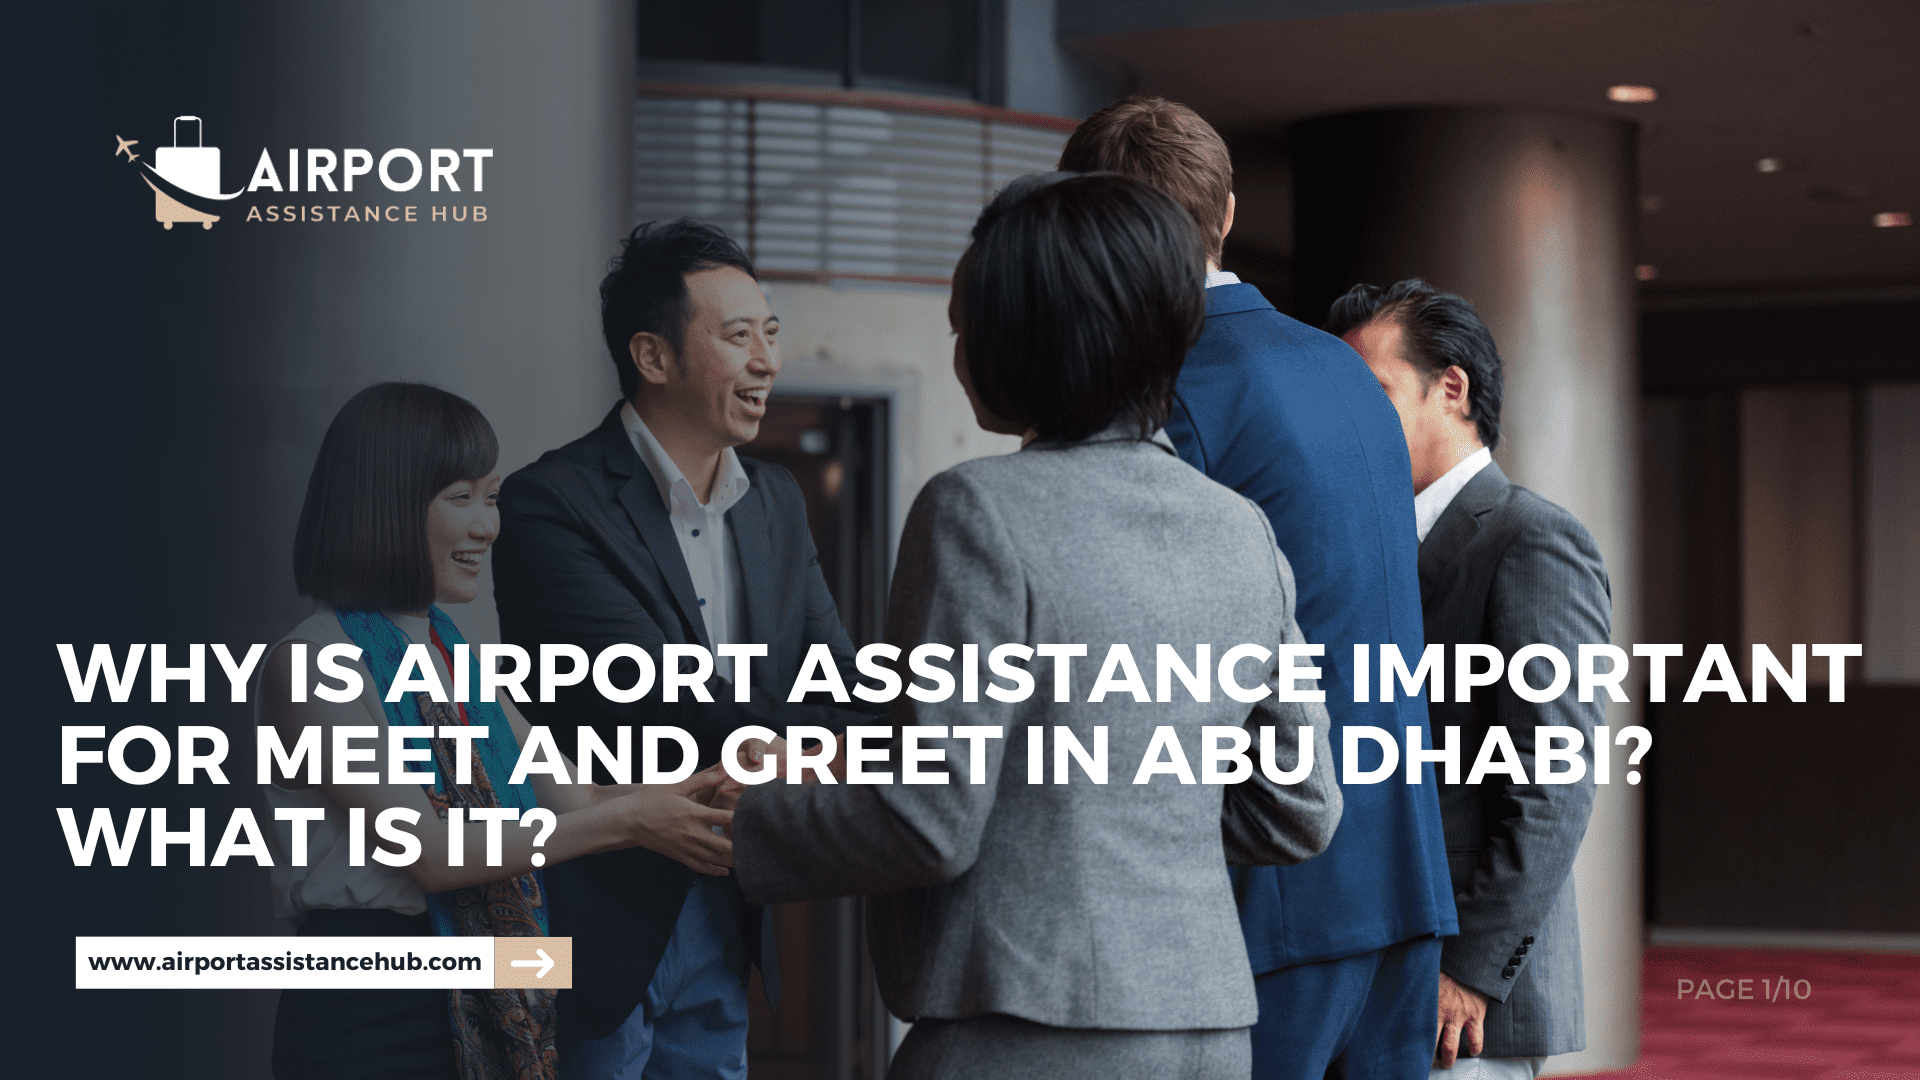 Why Is Airport Assistance Important For Meet And Greet In Abu Dhabi? What Is It?